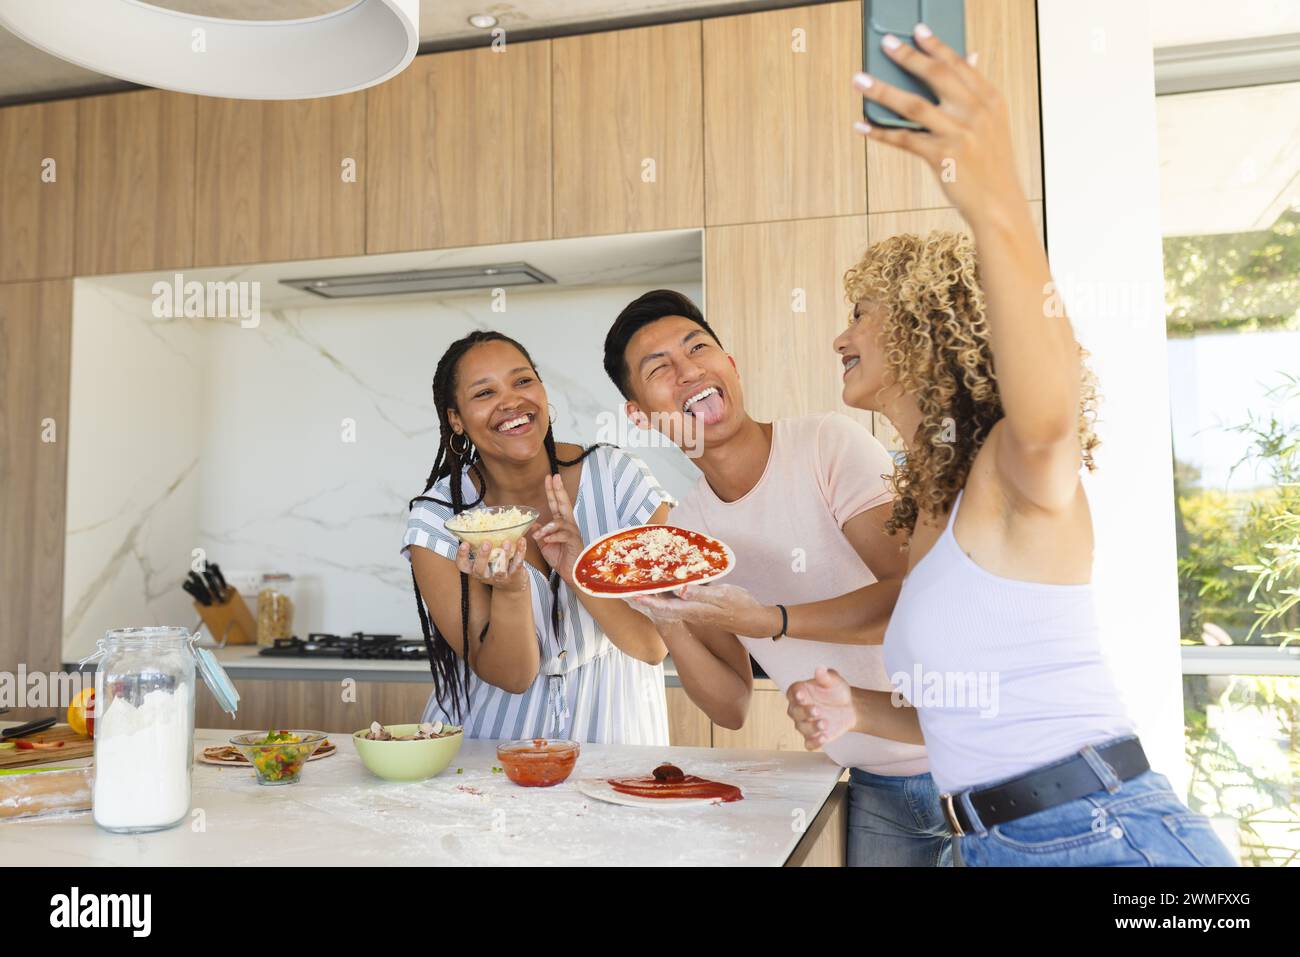 Young Asian man and two young biracial women enjoy making pizza at home Stock Photo